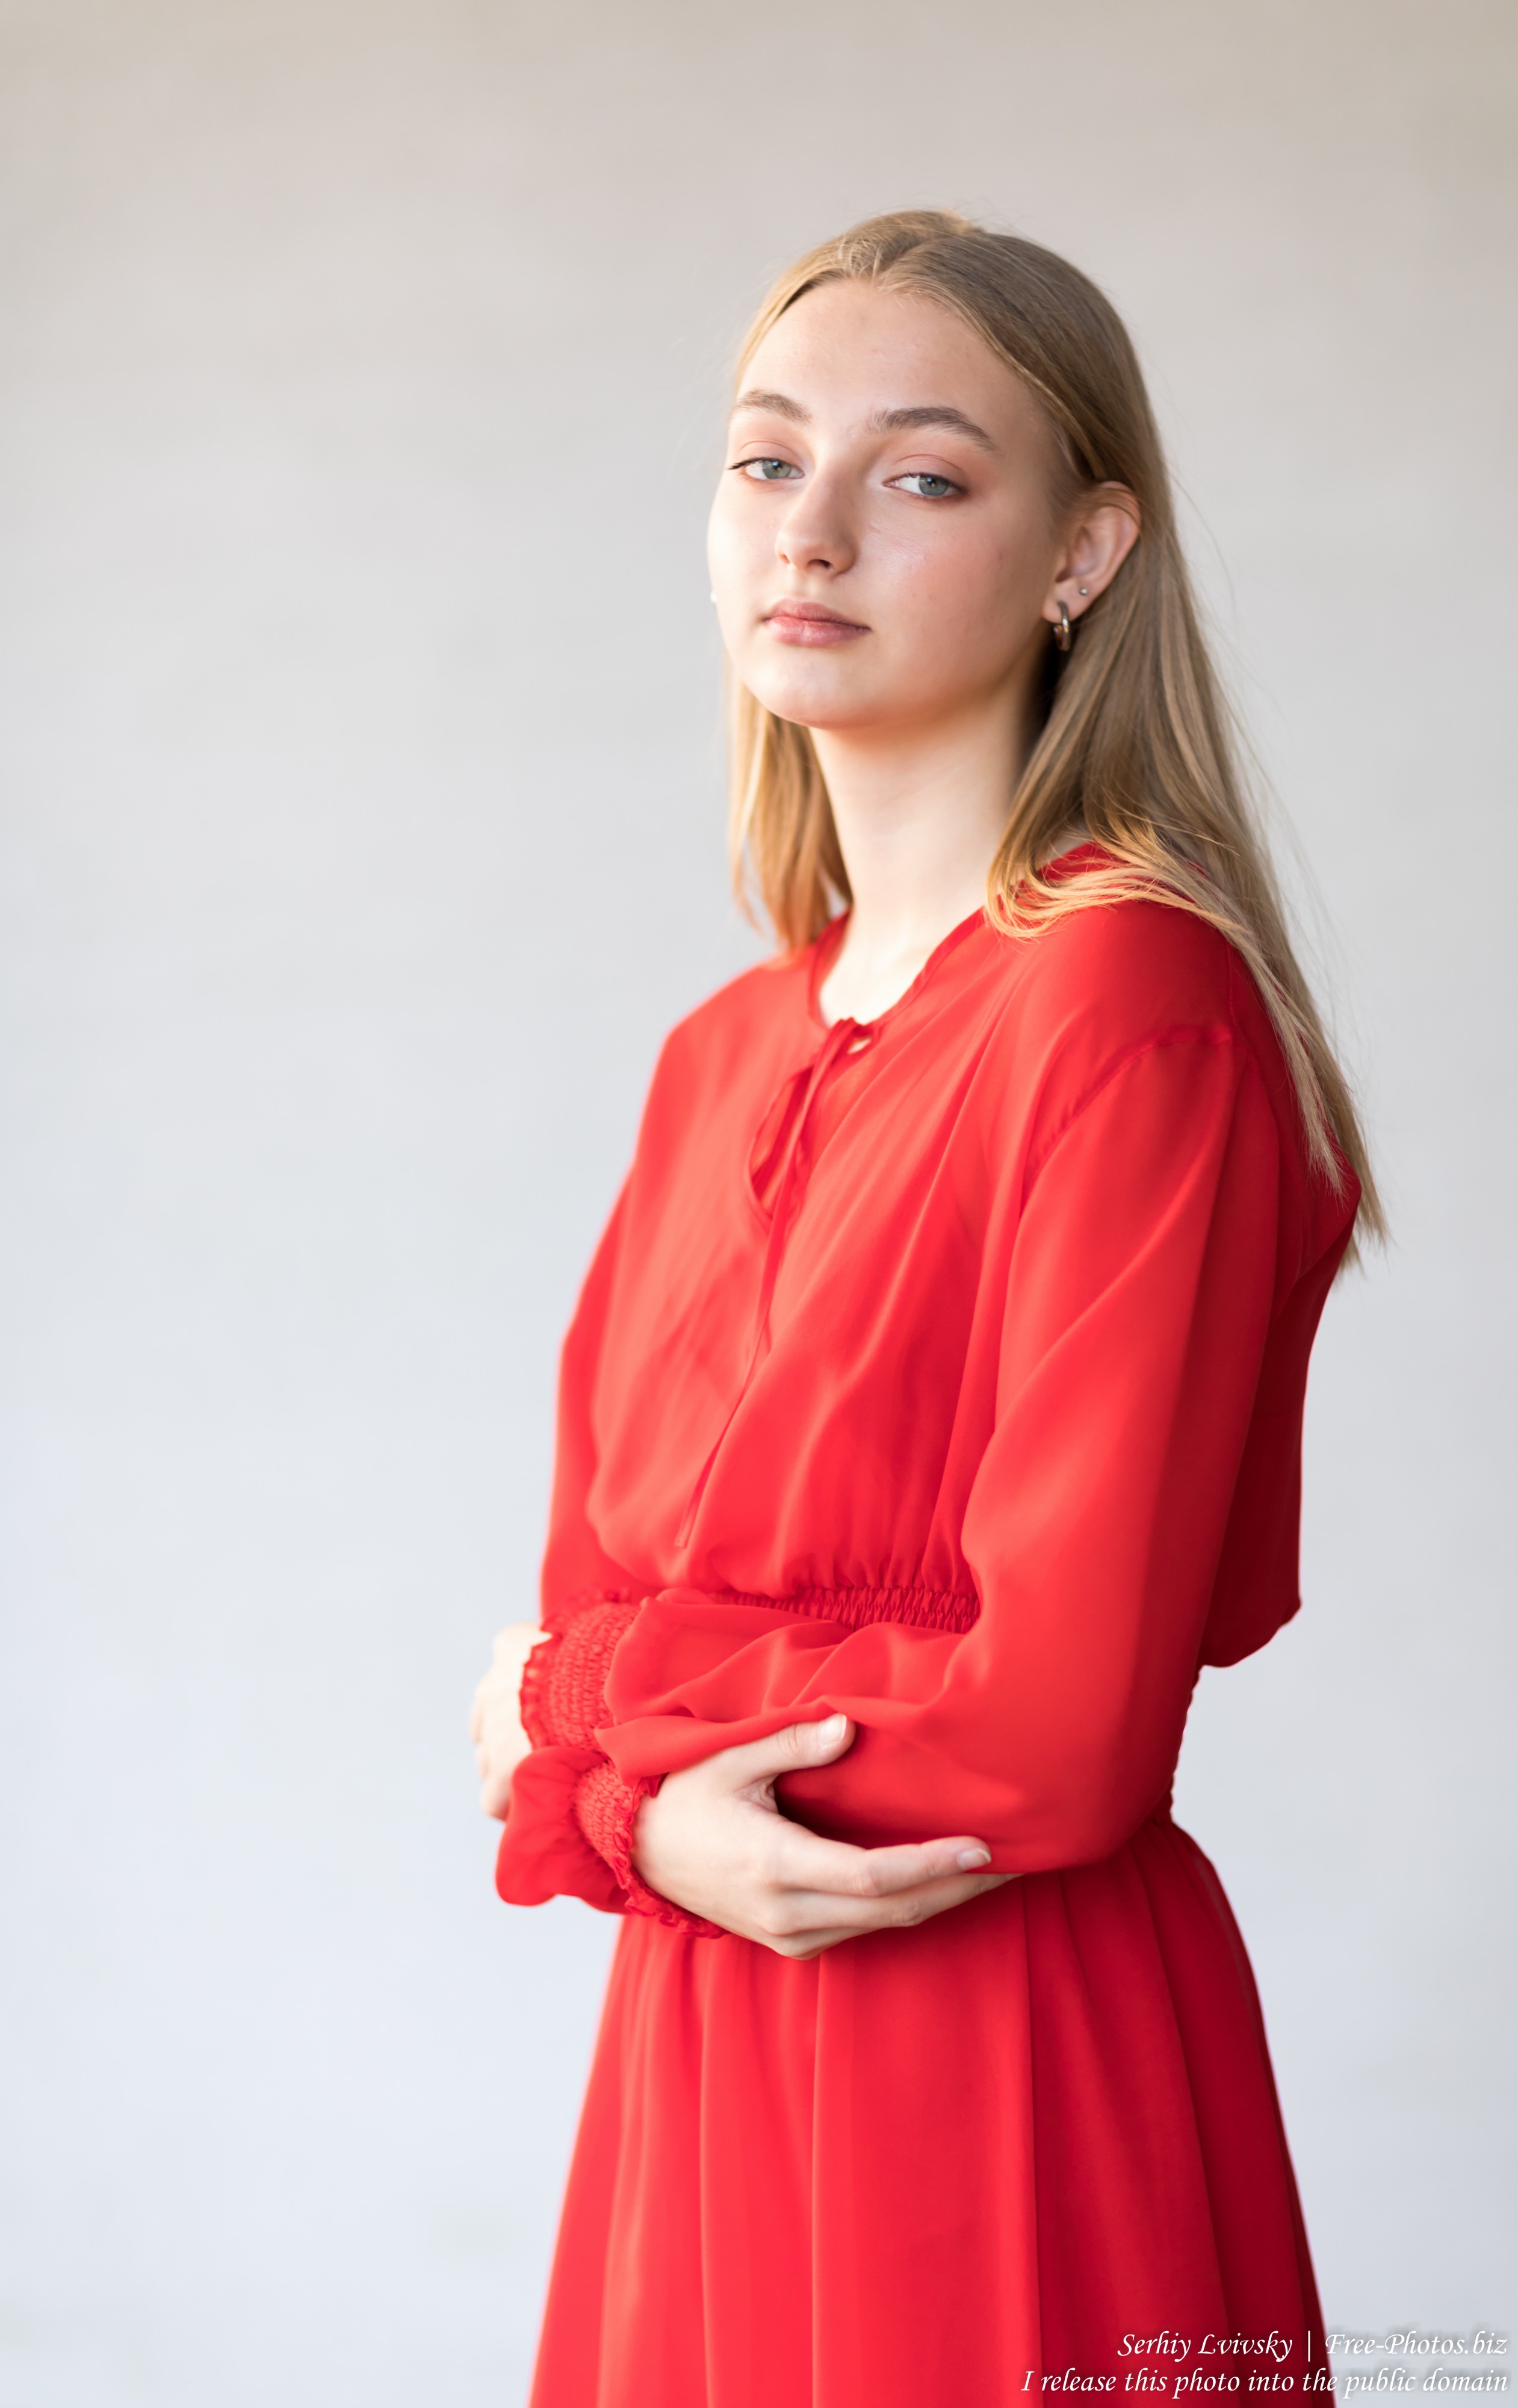 Photo Of Nastia A 16 Year Old Natural Blonde Girl Photographed In September 2019 By Serhiy